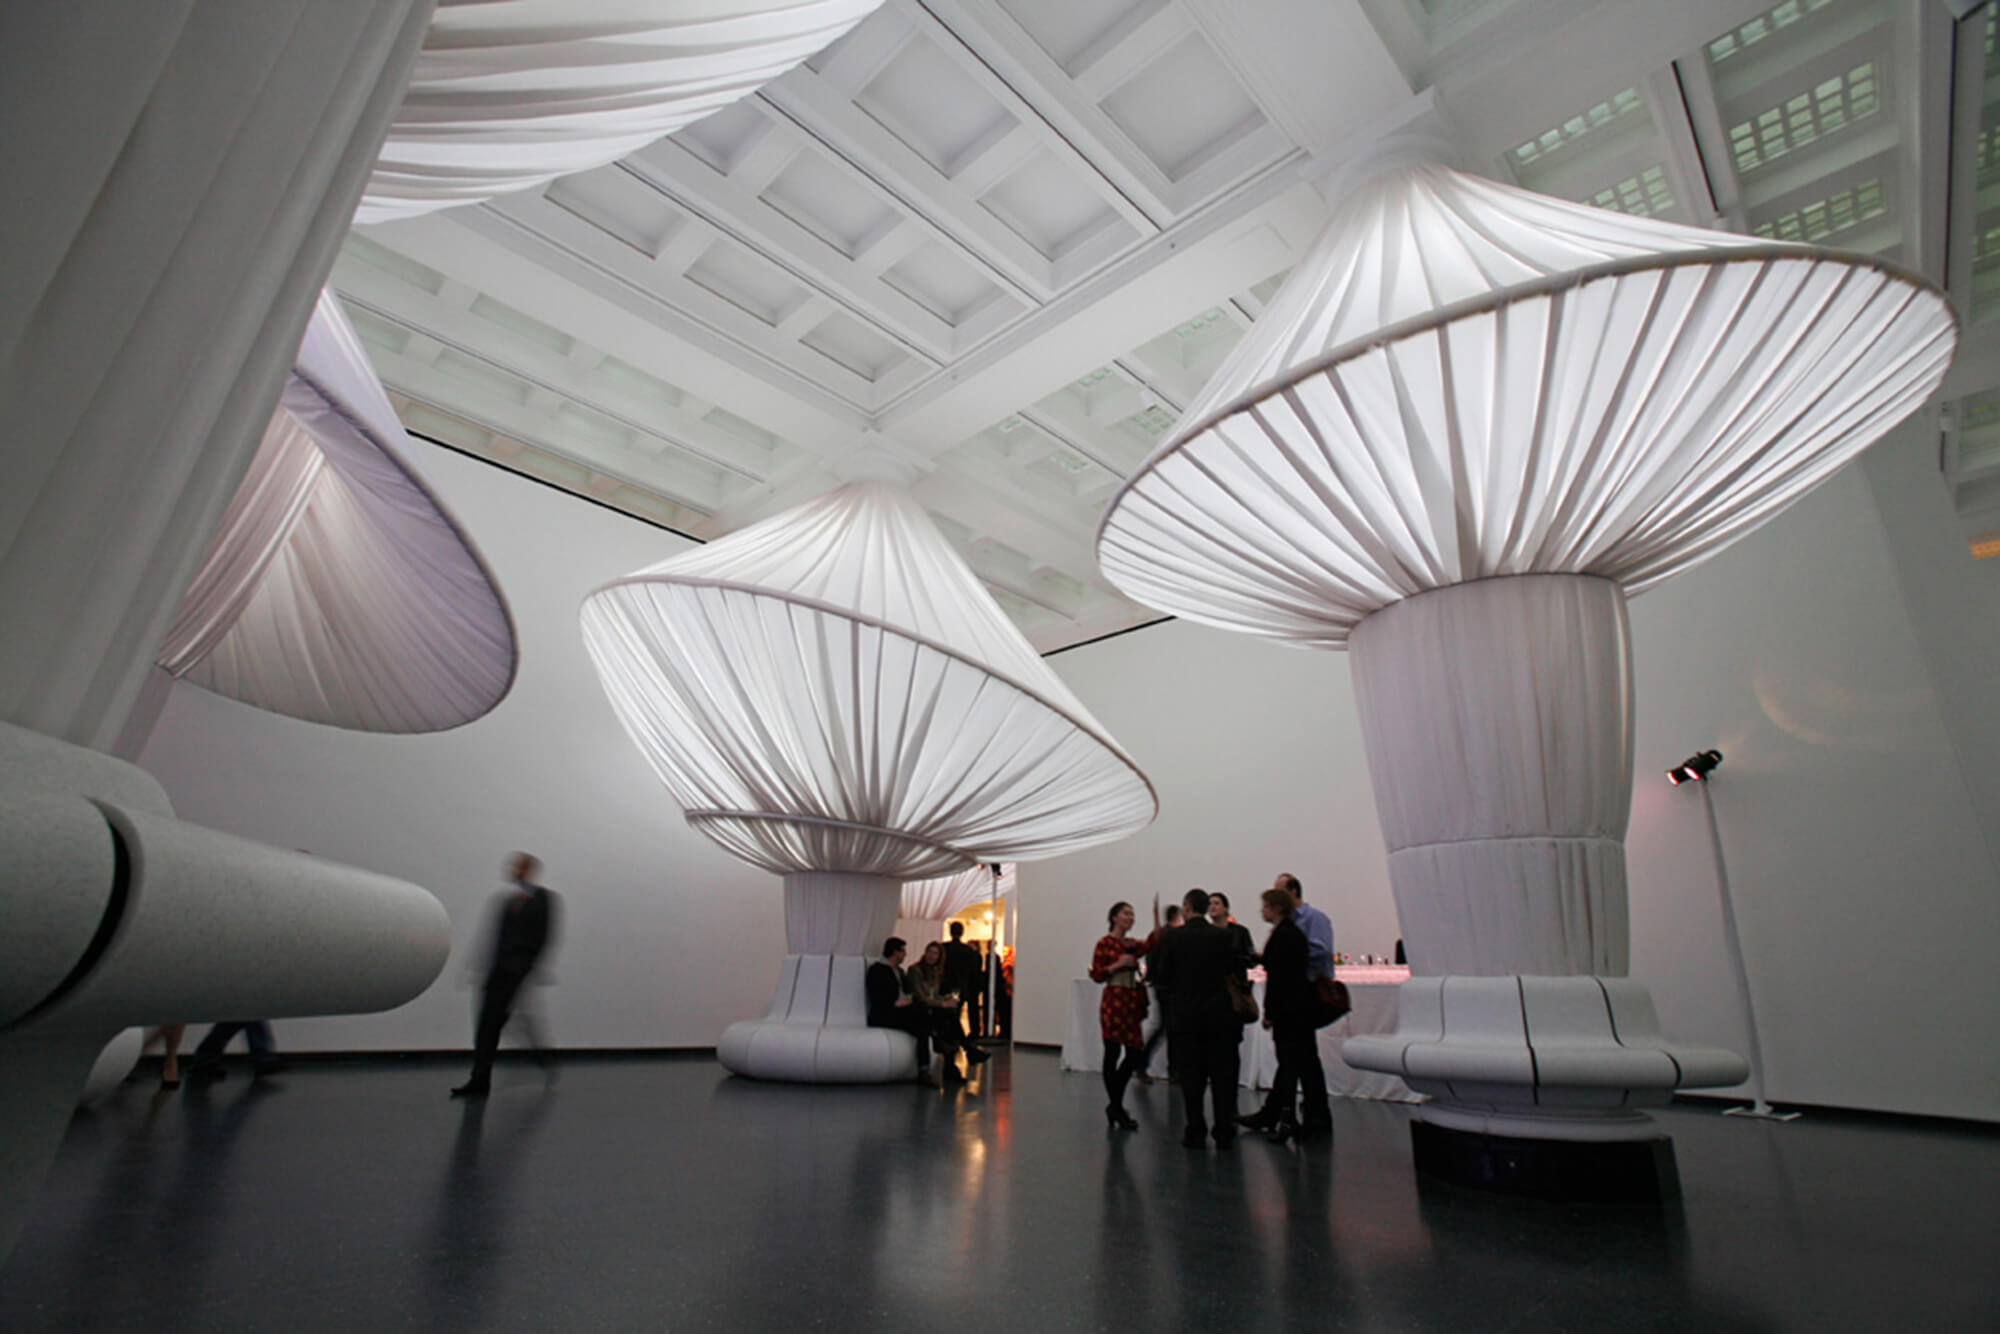 Columns made out of white Sunbrella fabric add dimension to the Great Hall of the Brooklyn Museum